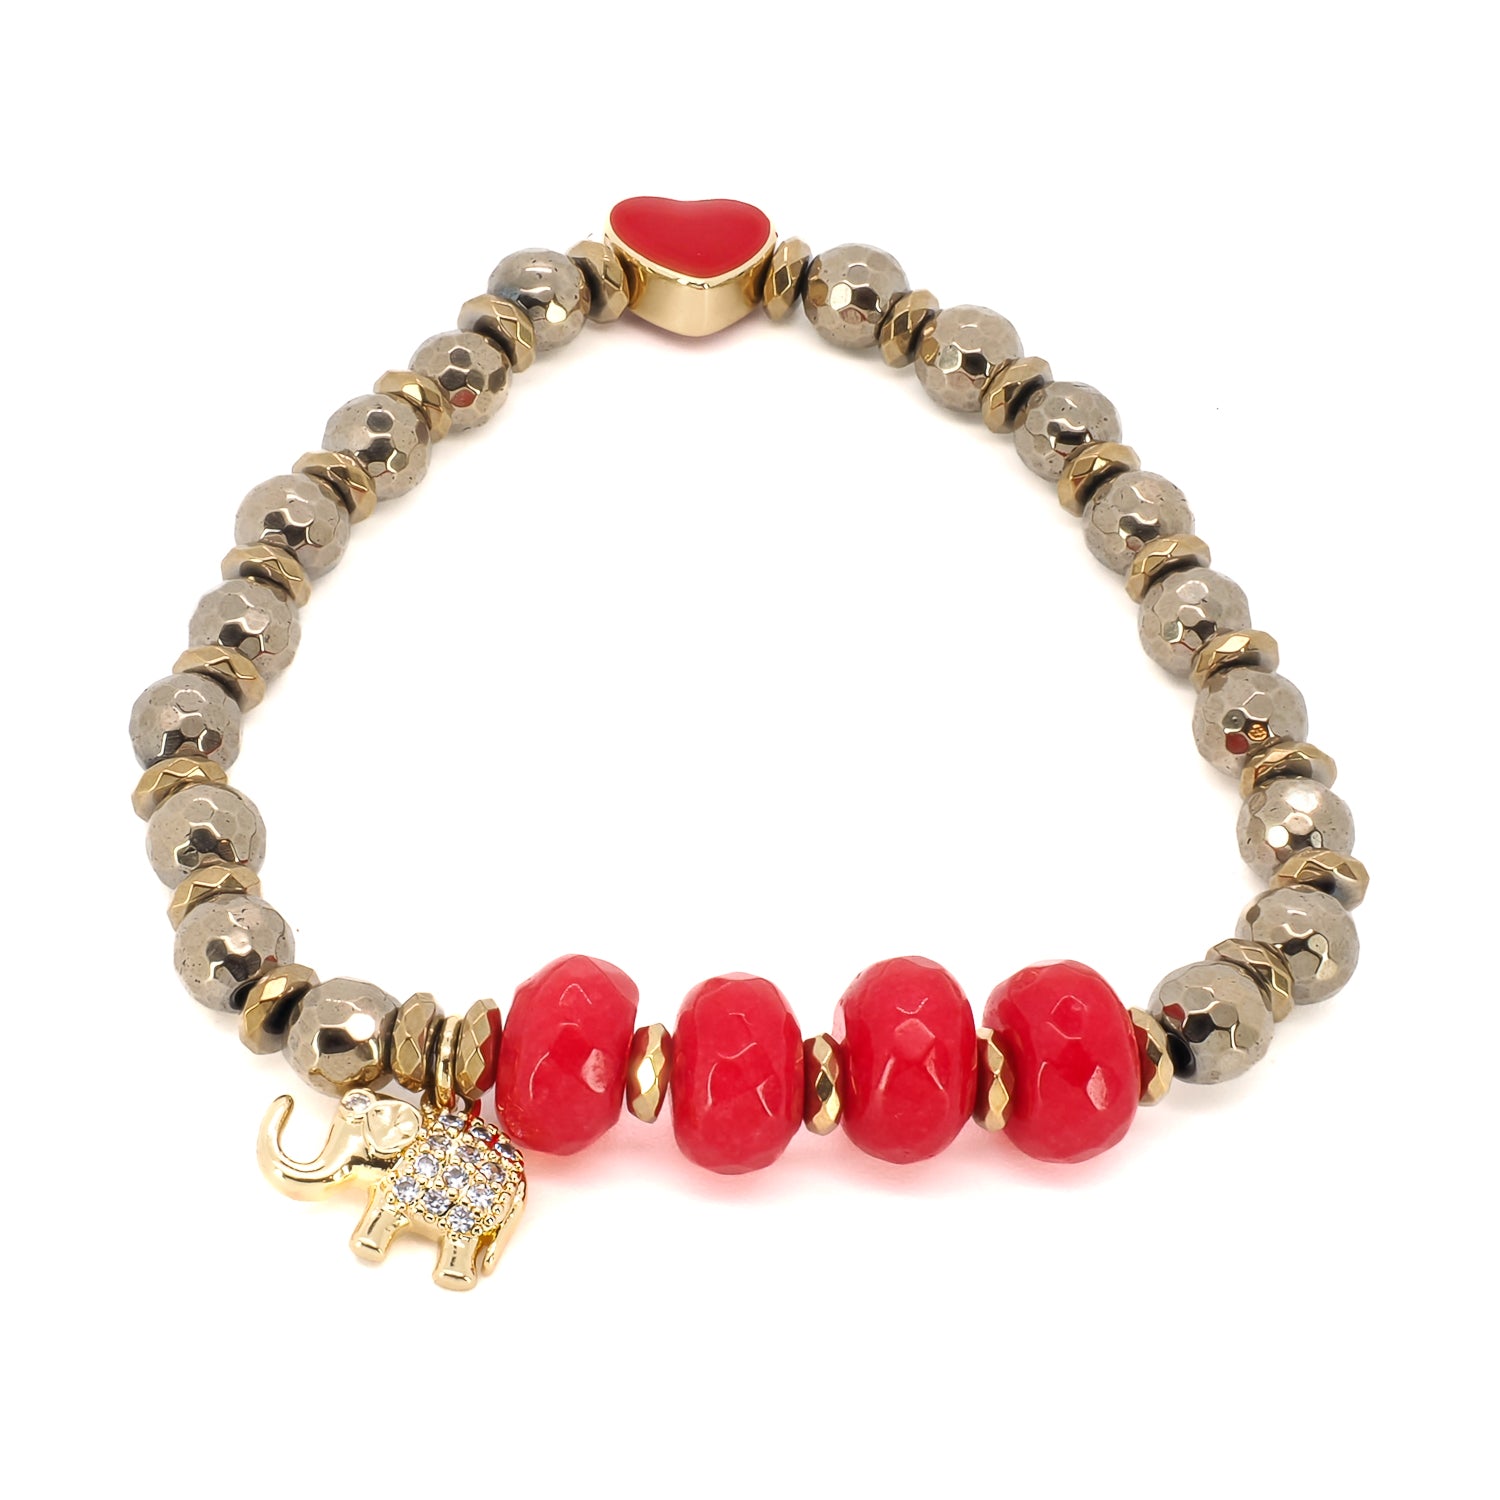 Embrace the beauty of the Red Heart Lucky Elephant Bracelet, featuring hematite stone beads and a gold-plated Lucky Elephant charm.